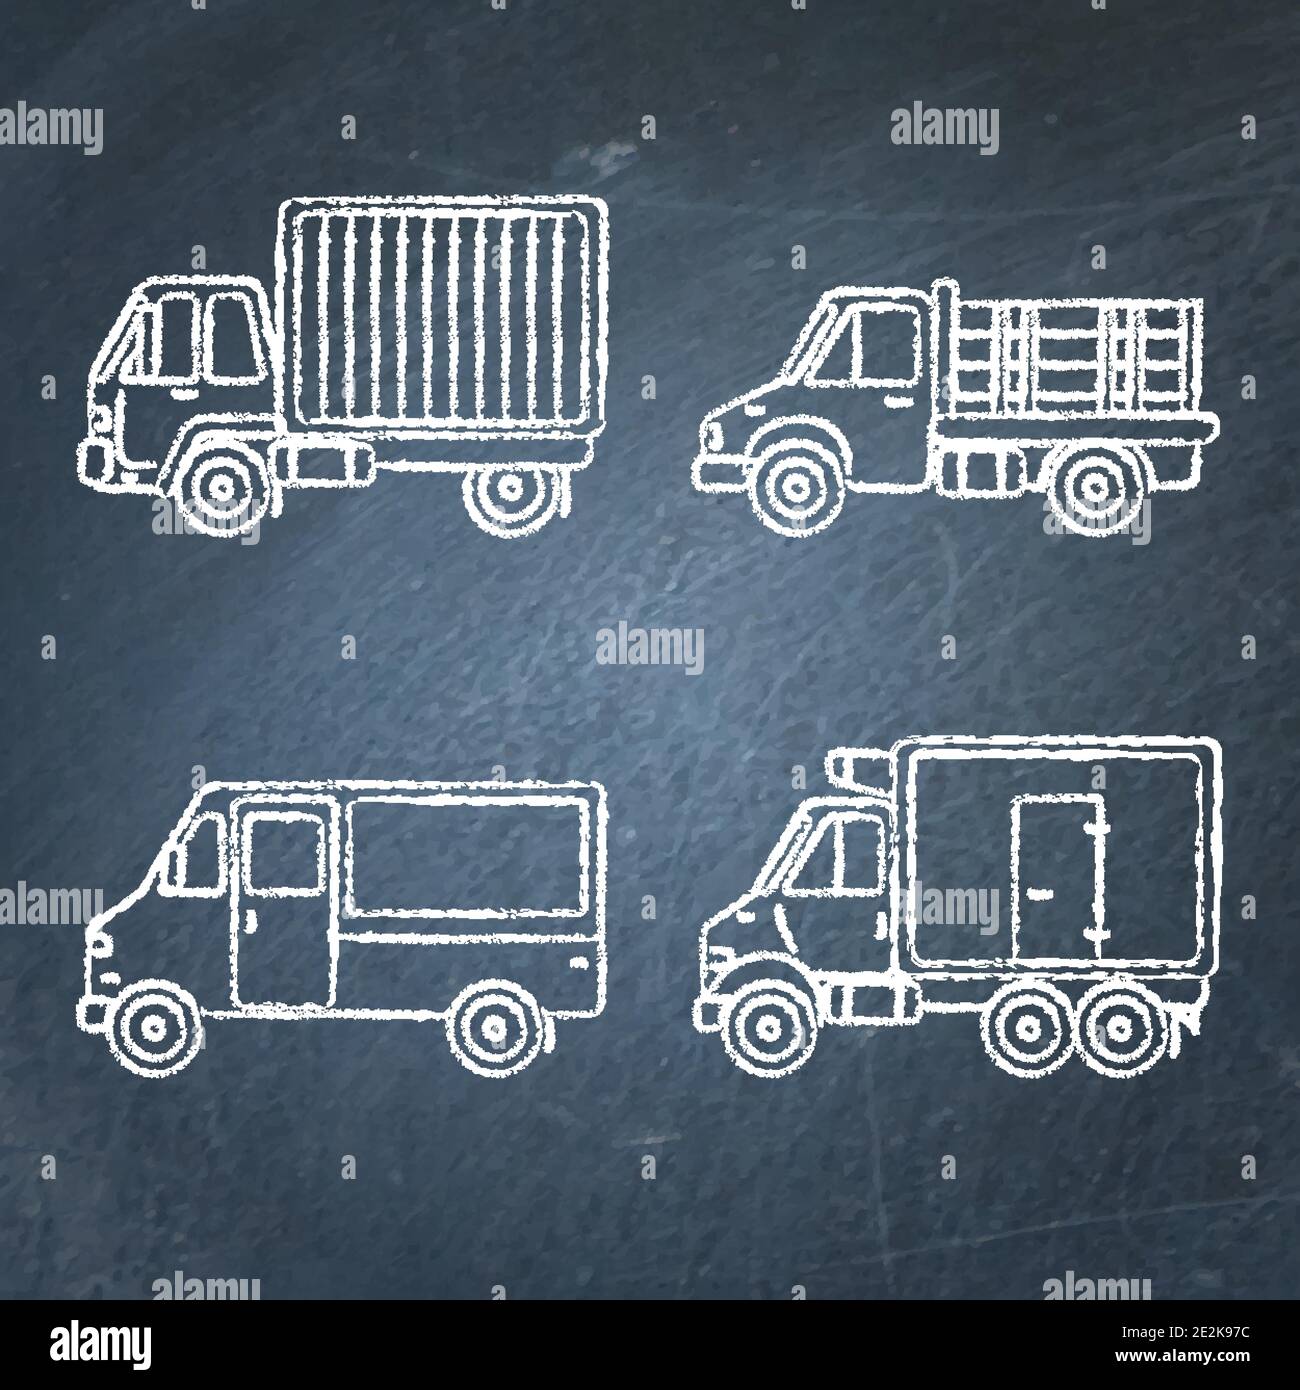 Set of truck icons sketches on chalkboard. Collection of cargo vehicle symbols drawings. Stock Vector